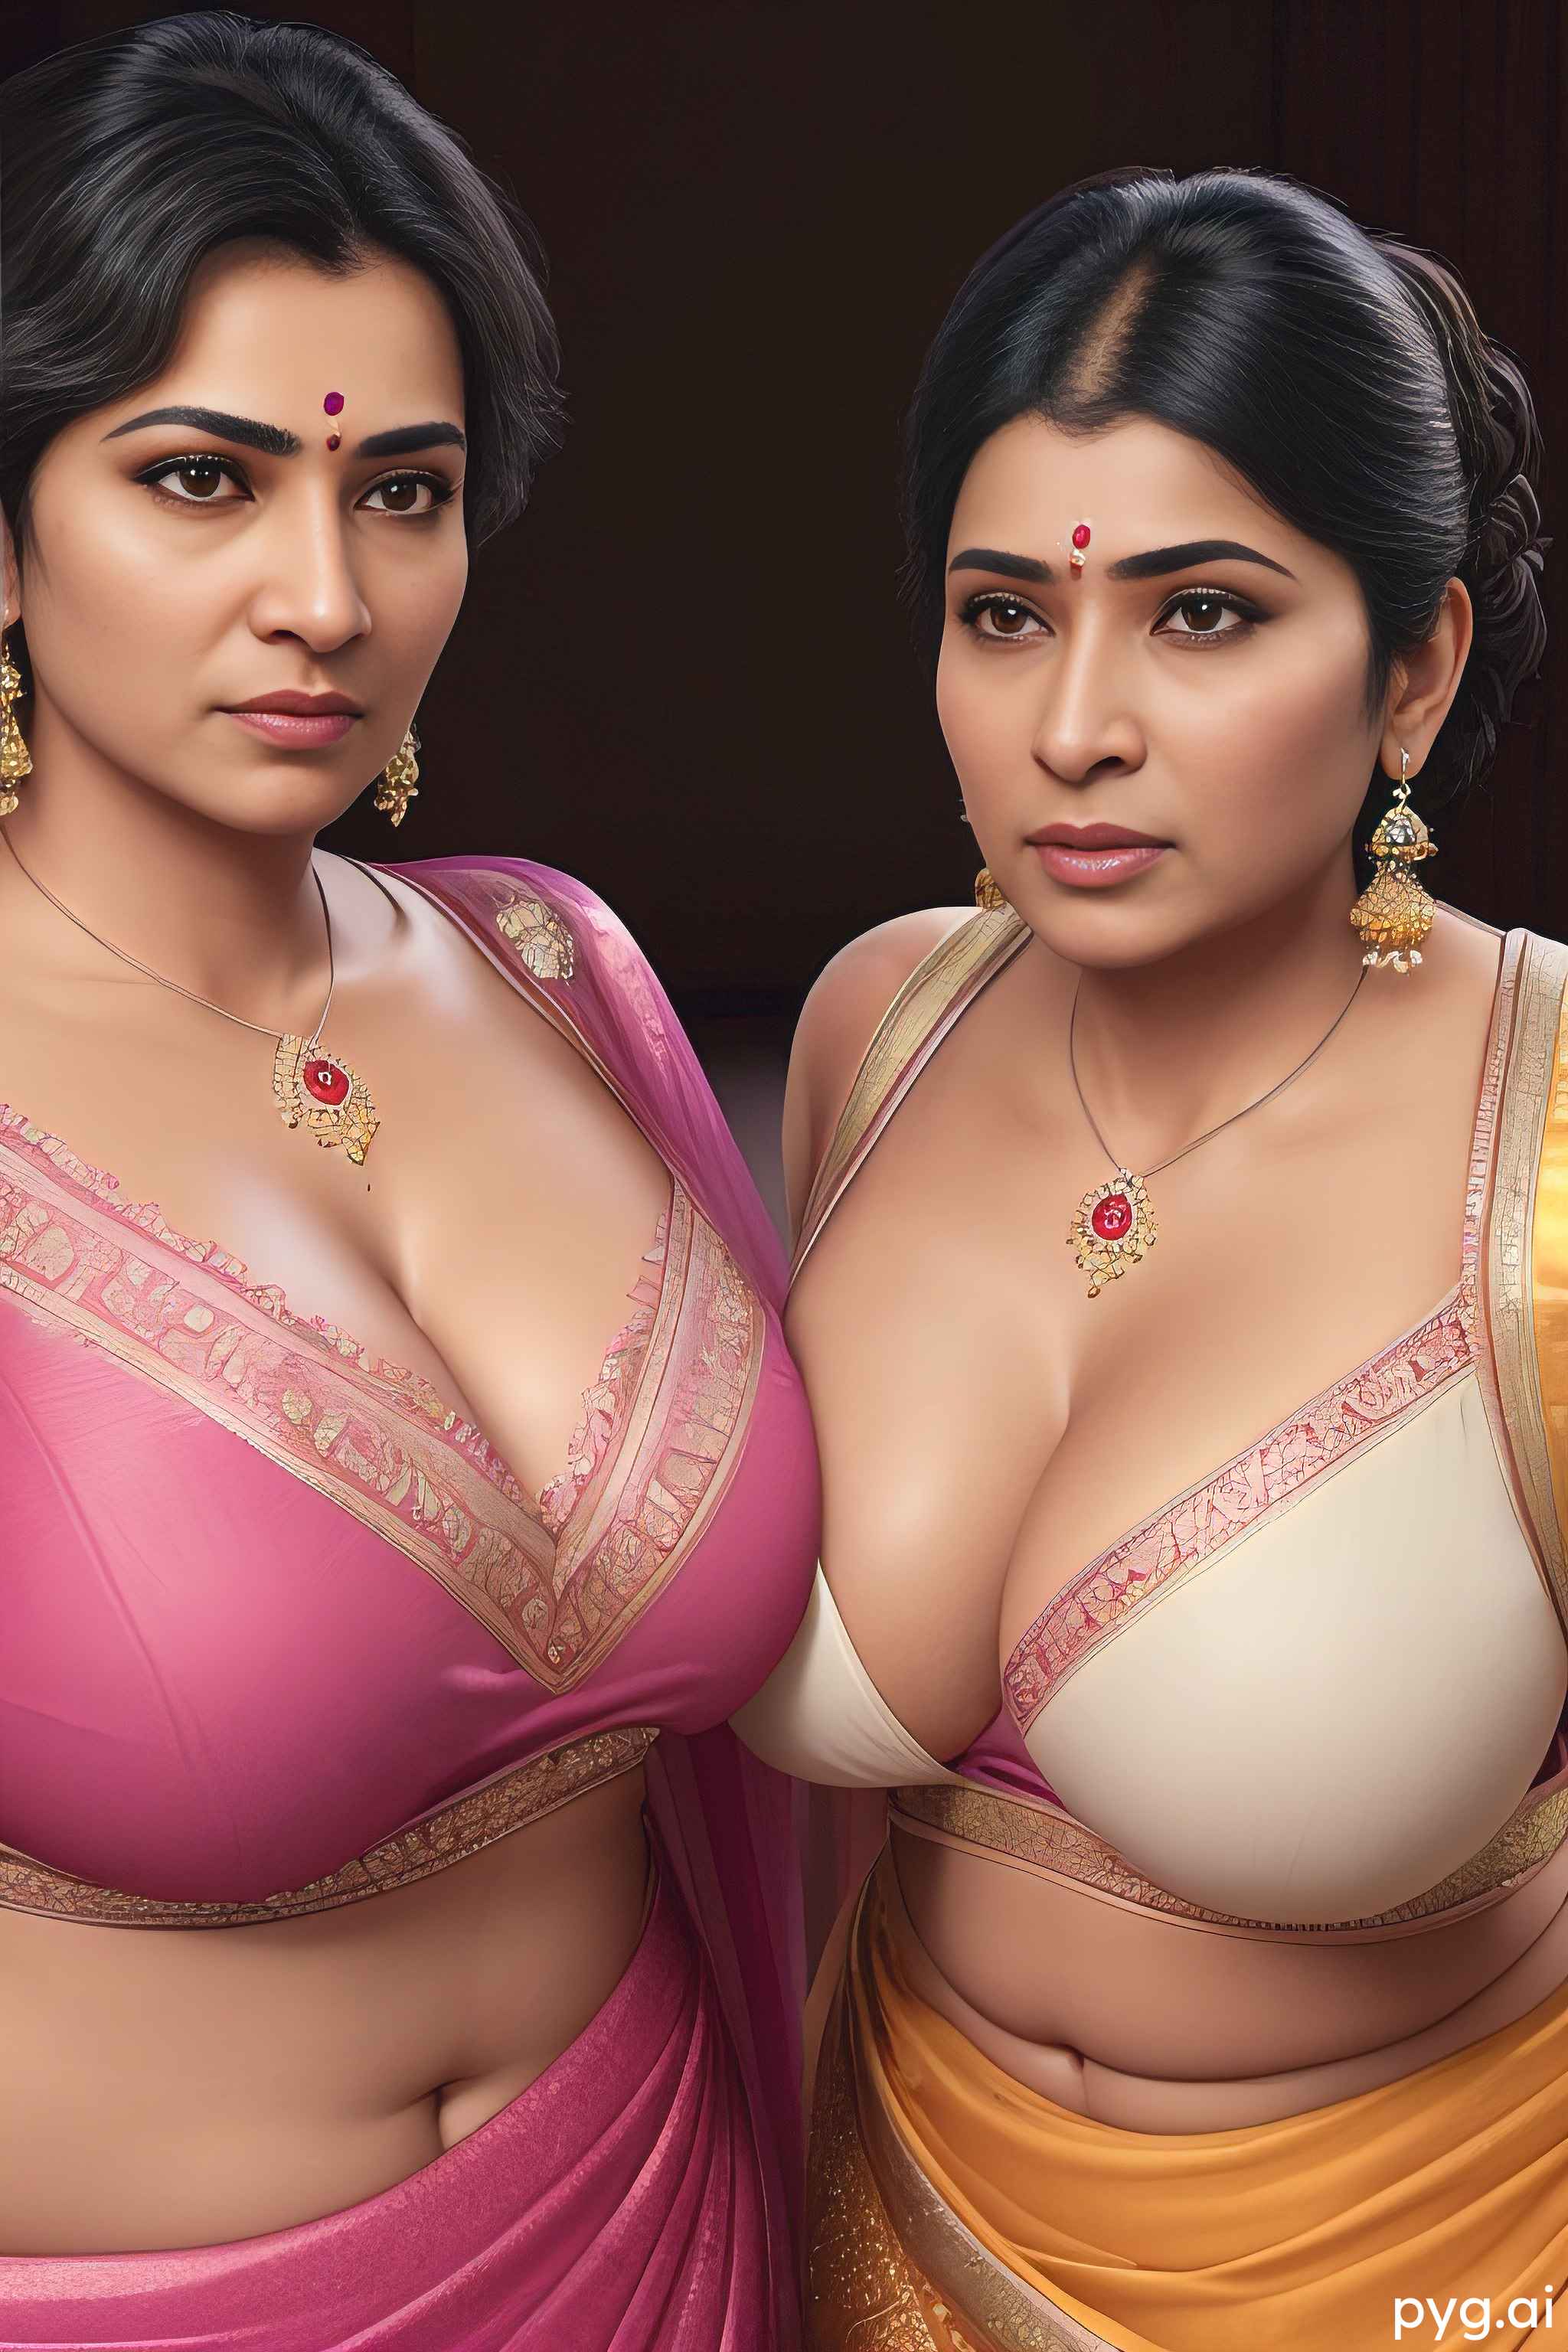 Indian Aunty Glamour - Which Indian Aunt you would choose? Pink or white | AI Porn